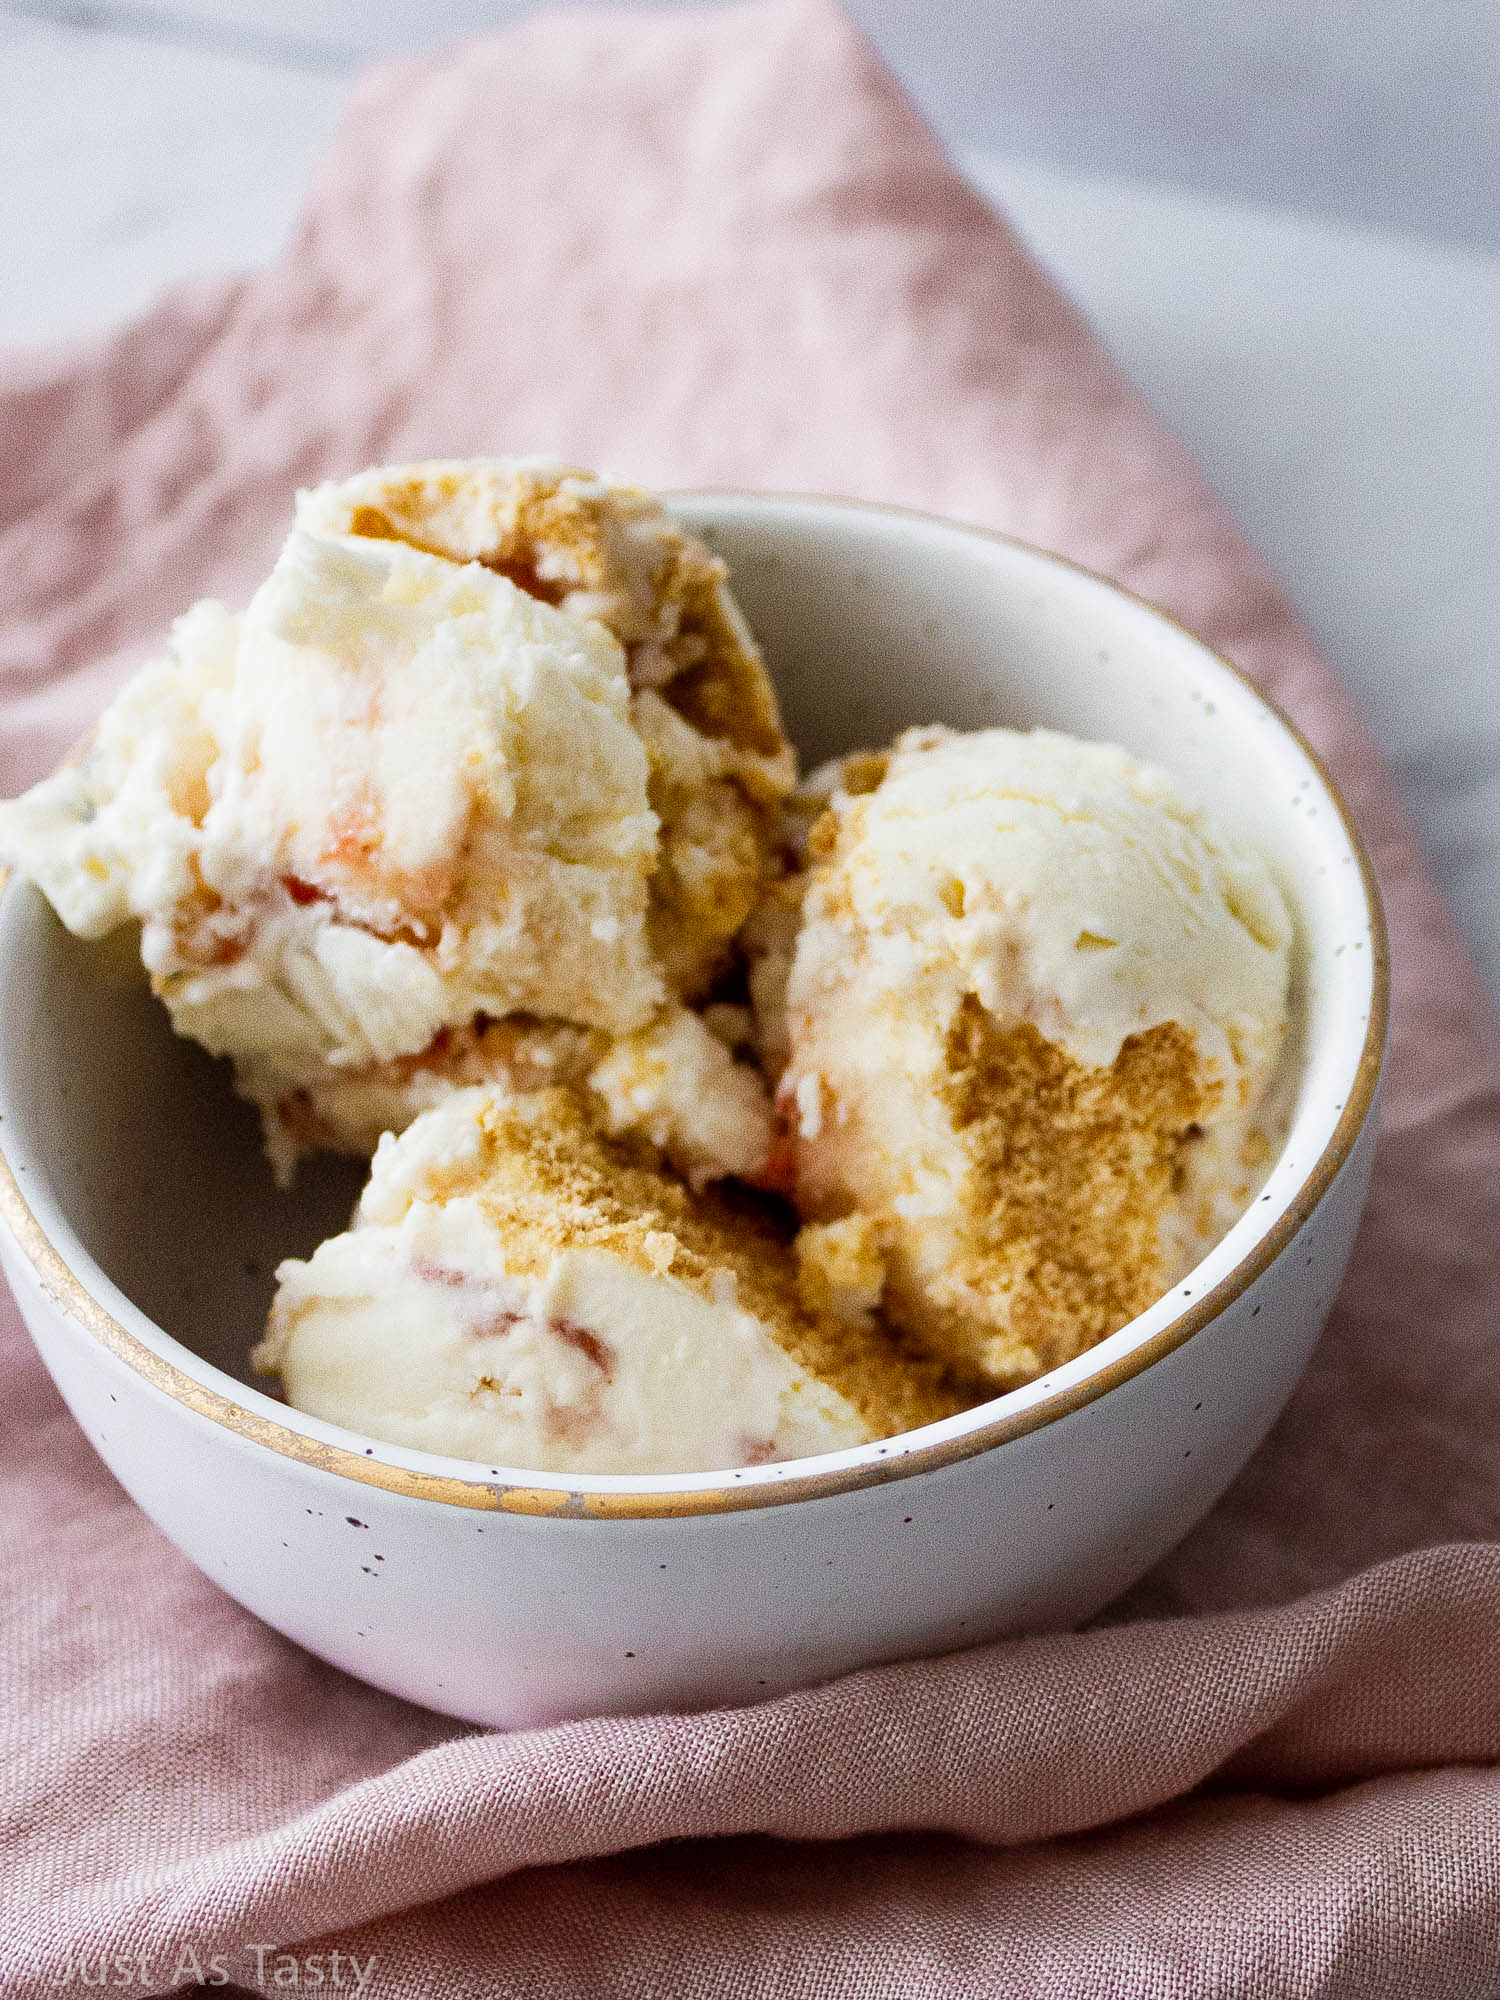 Scoops of strawberry swirl ice cream in a bowl.